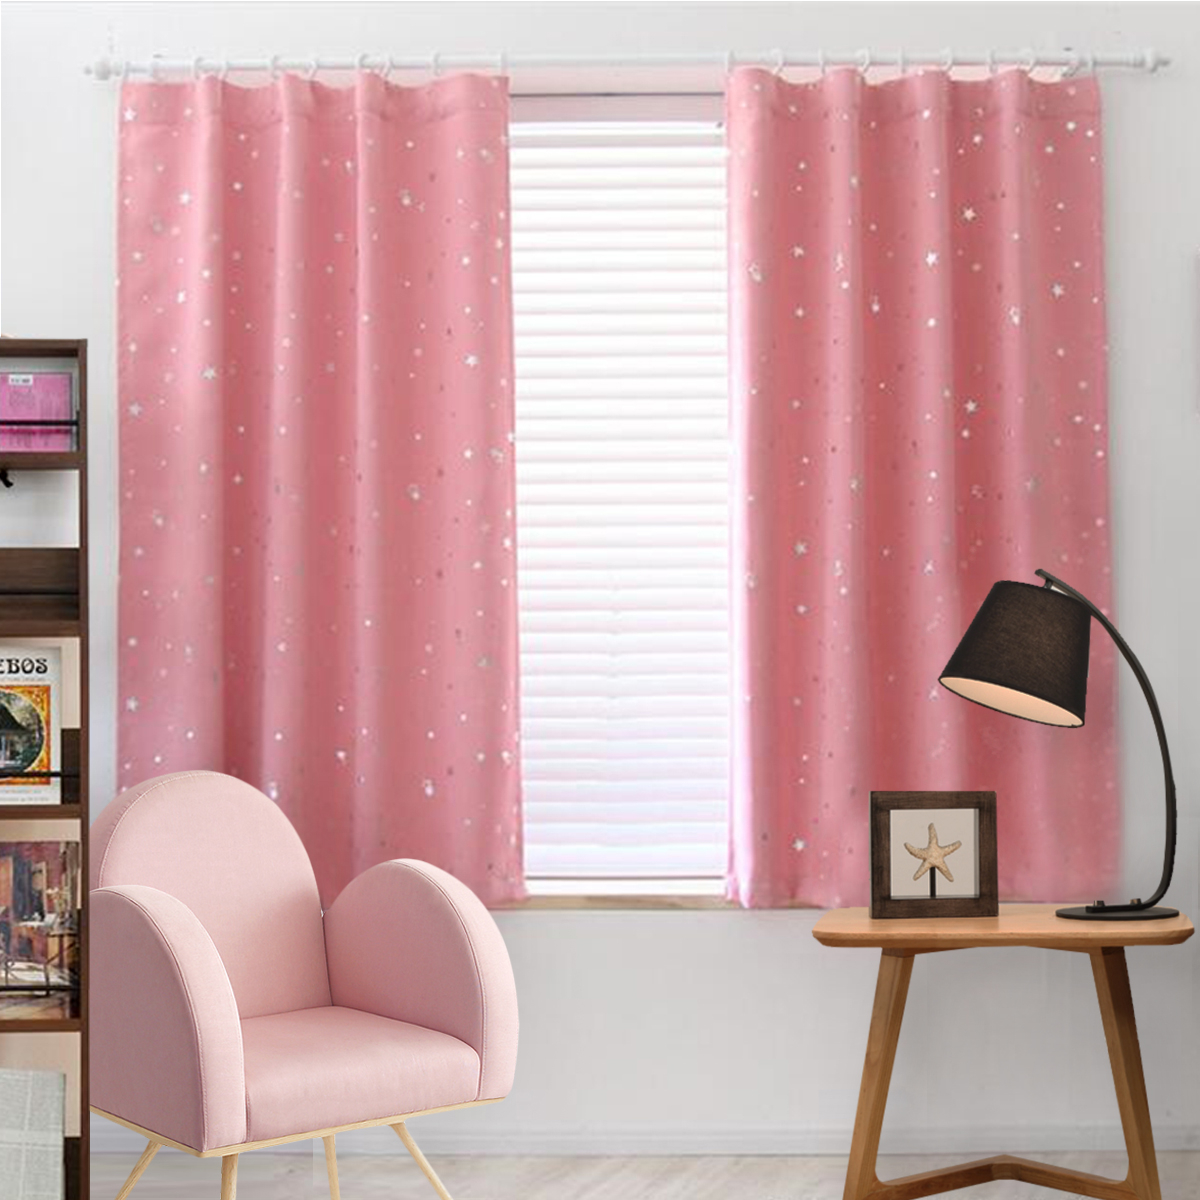 Star Thermal Blackout Curtains Hooks, Curtains For Boy And Girl Room